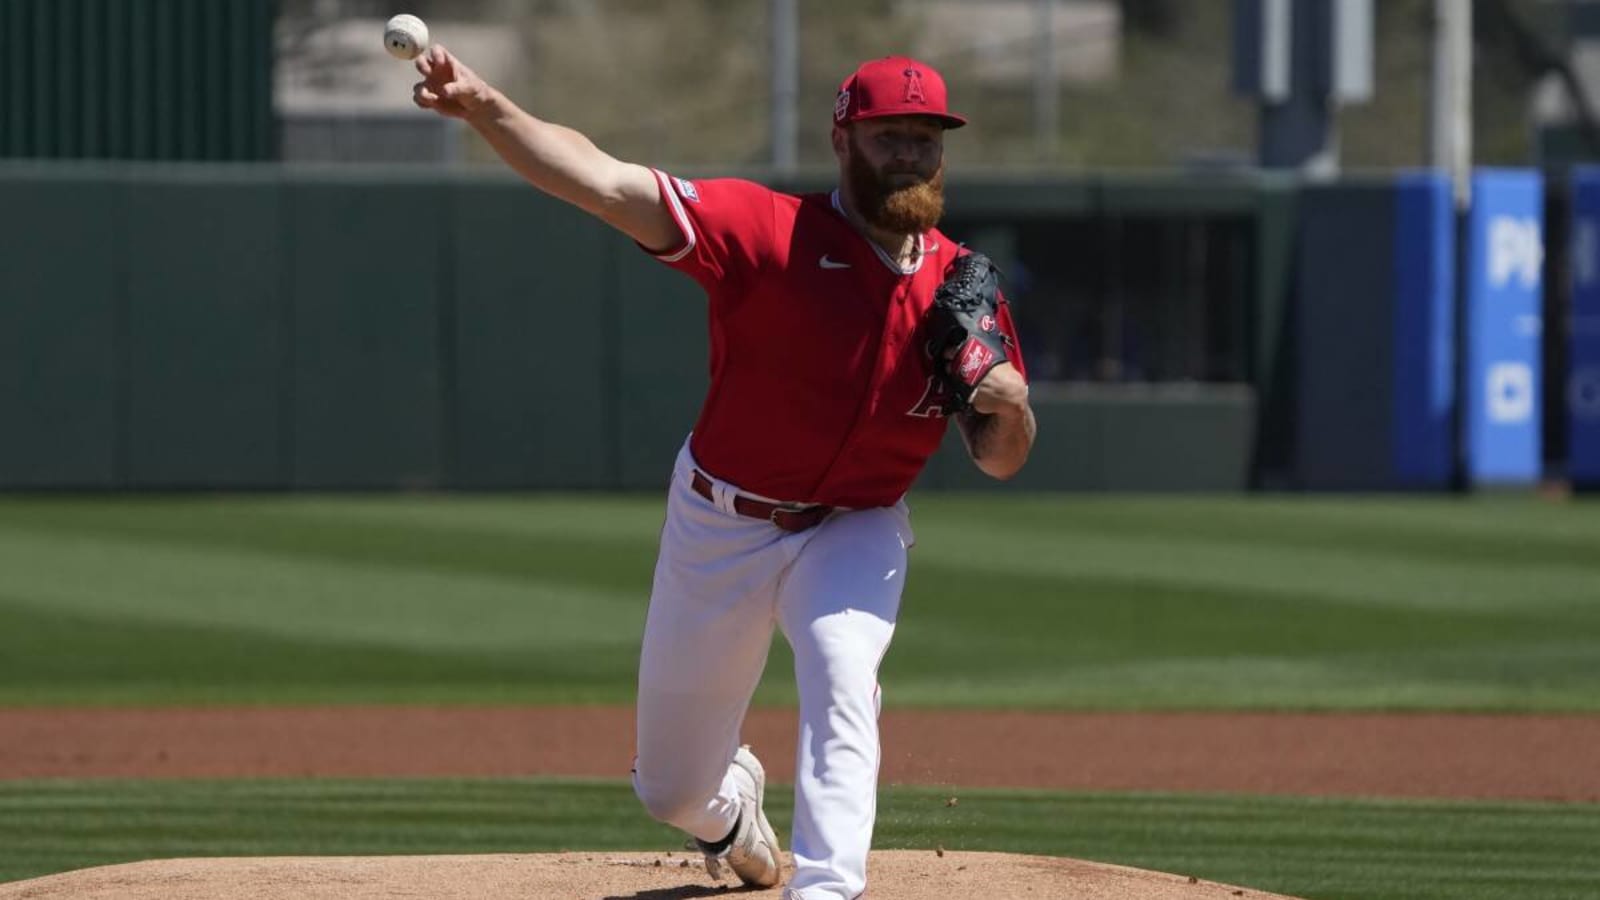 Angels Pitcher To Miss Opening Day Potentially Opening Spot in Rotation